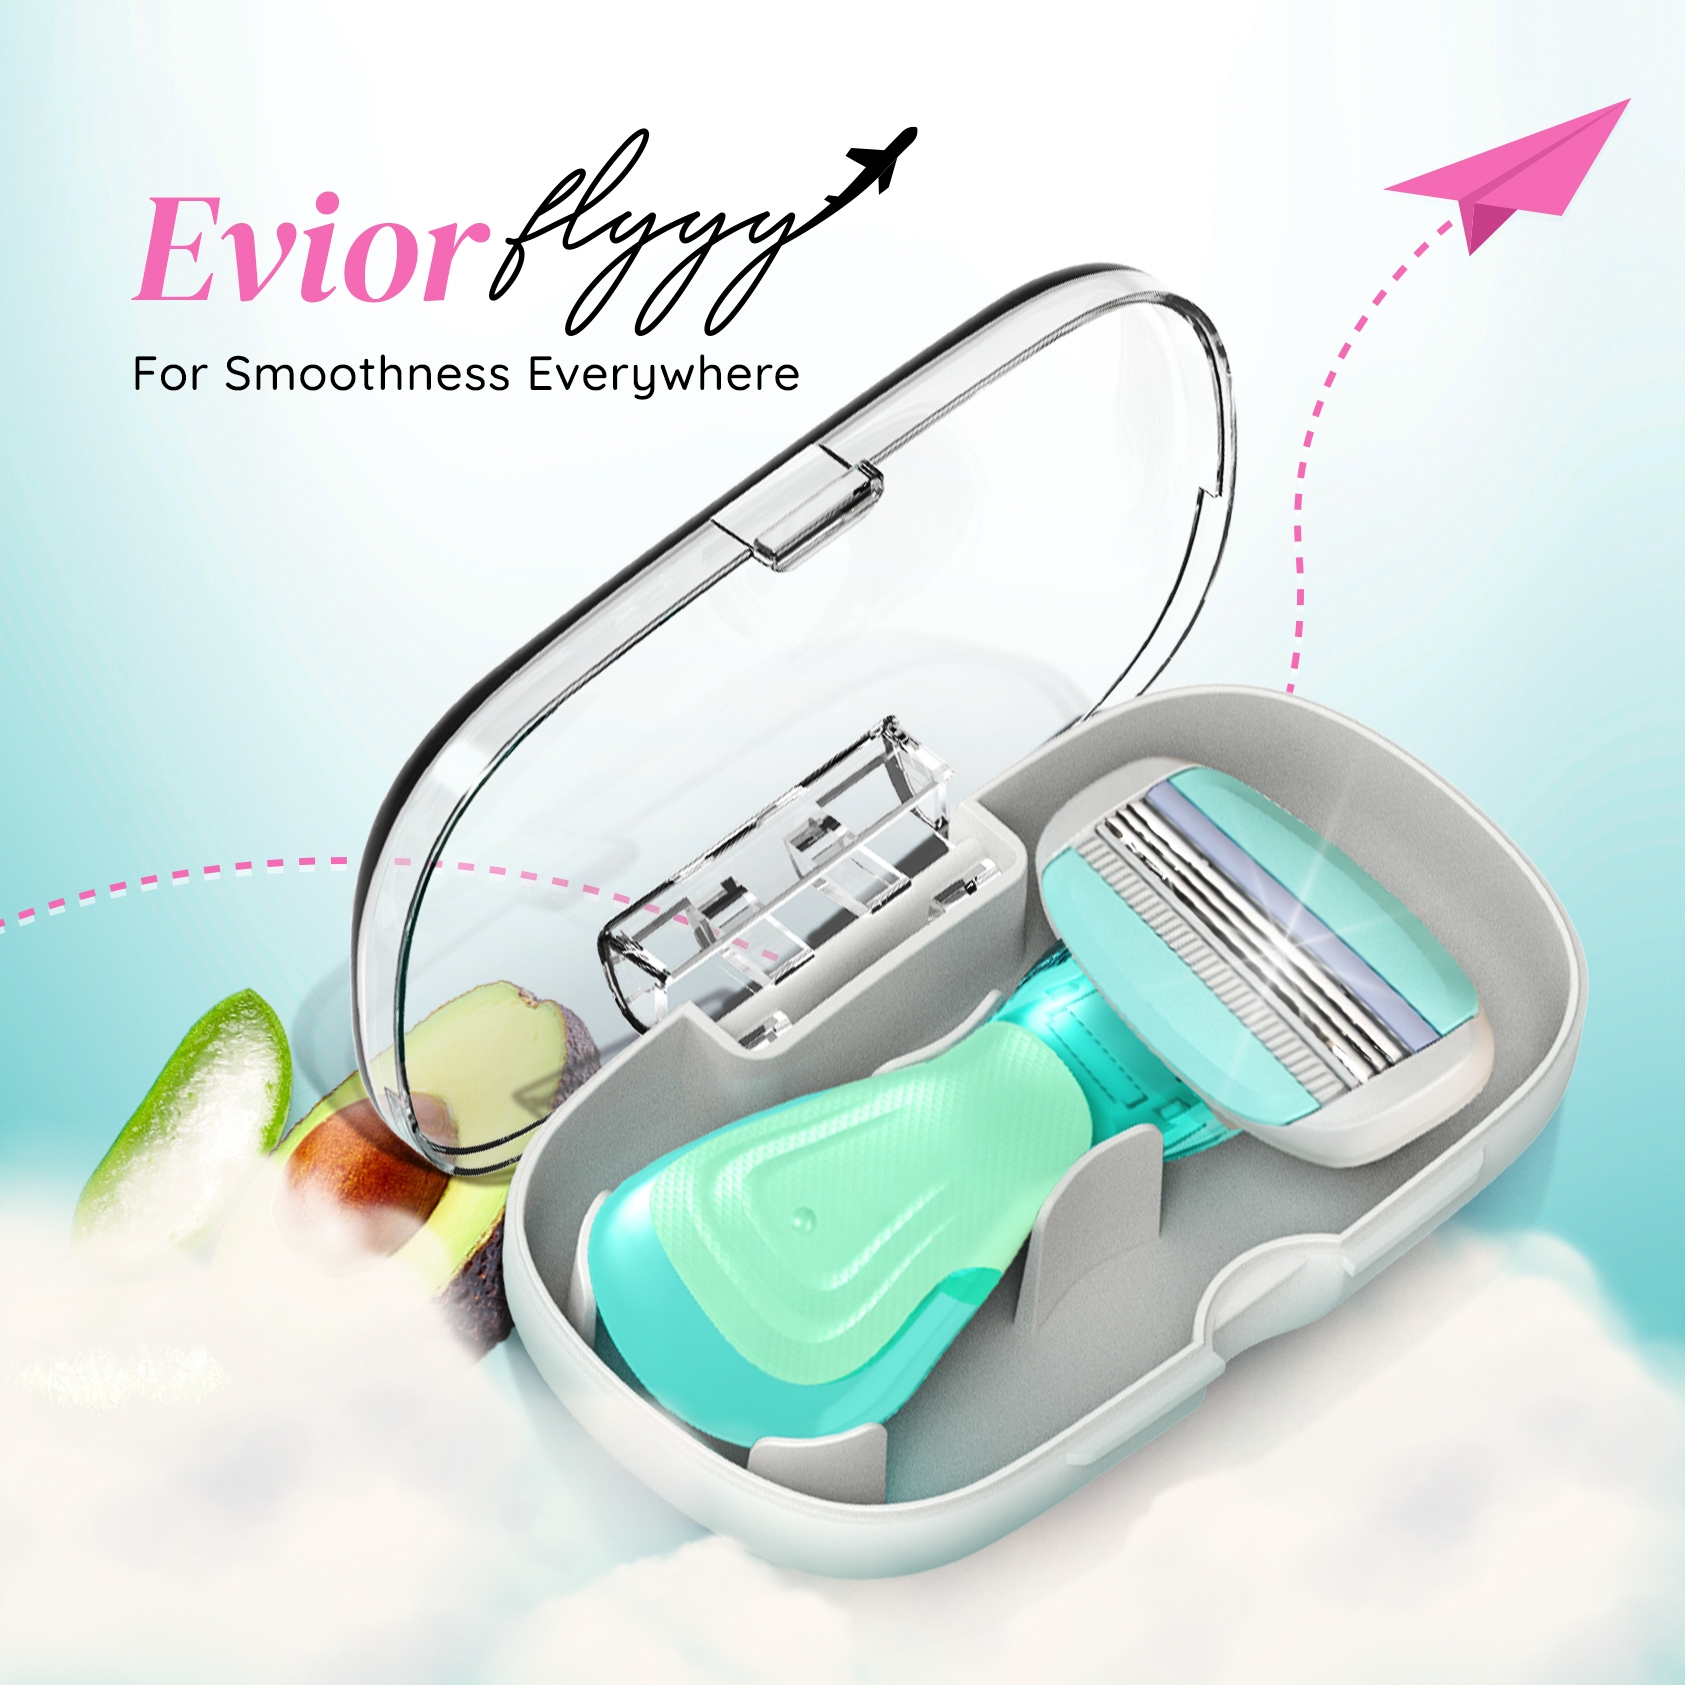 LetsShave | LetsShave Evior Flyyy Compact Razor for Women with Travel Case|3 Blade Full Body Hair Removal Razor for Girls |Wide Head & OpenFlow Cartridge 1